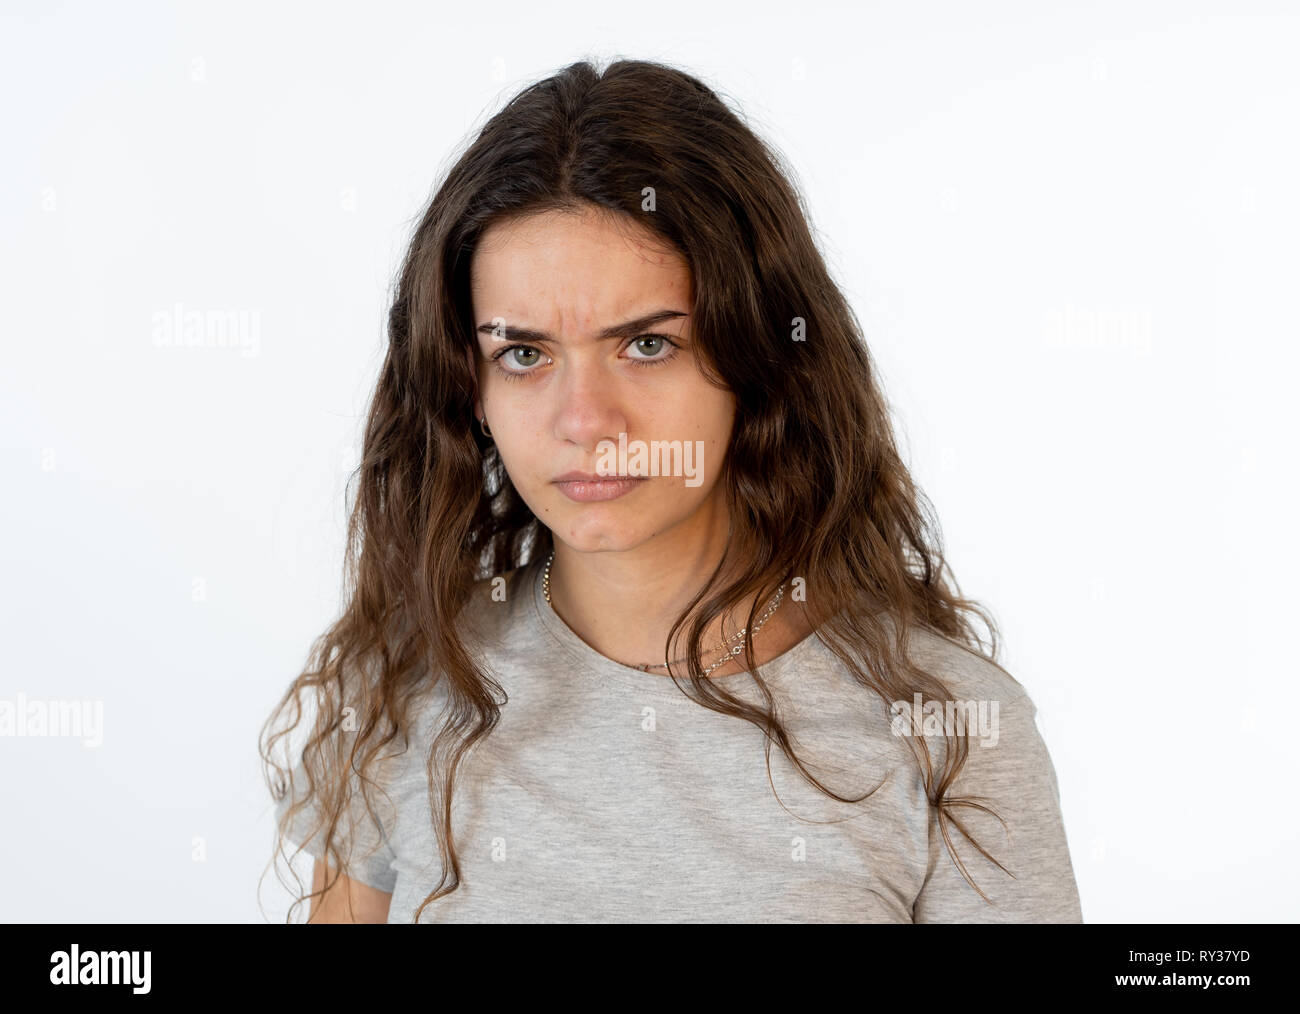 angry face women